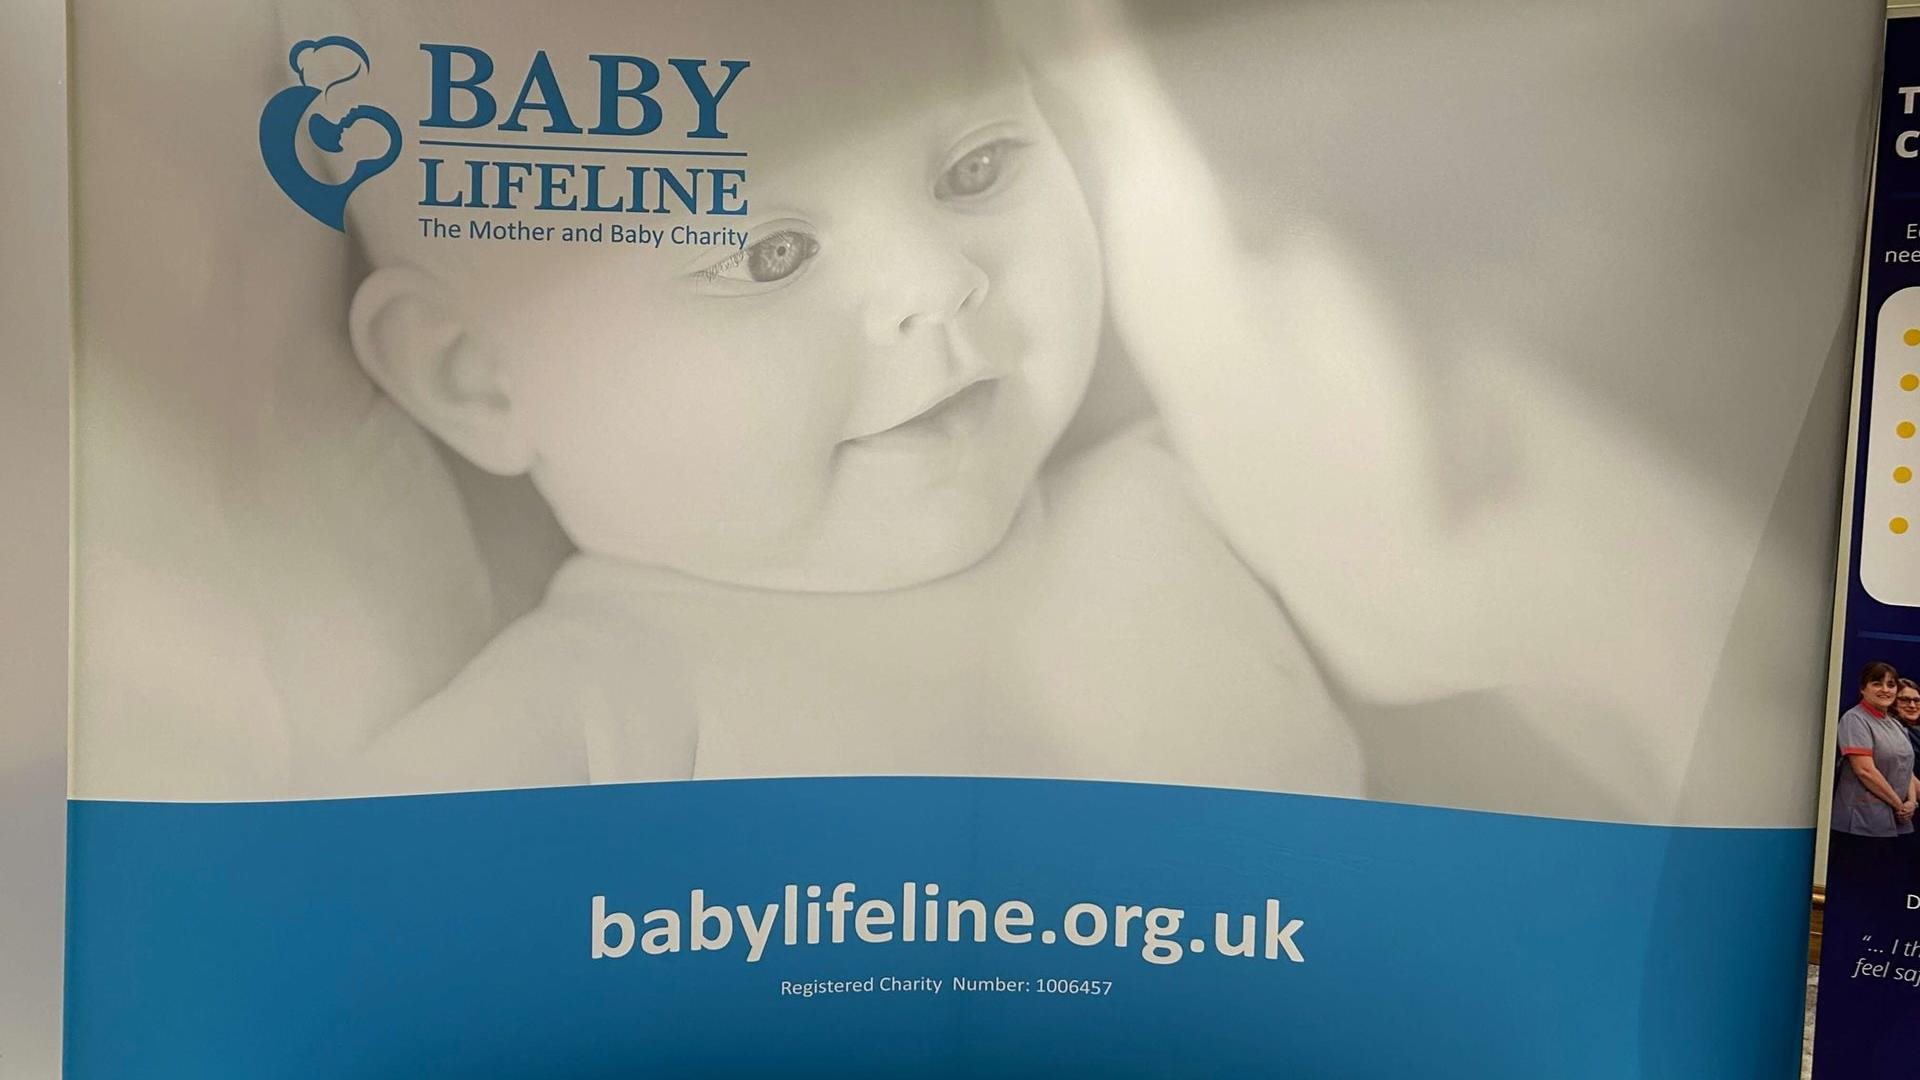 4th annual Baby Lifeline Conference